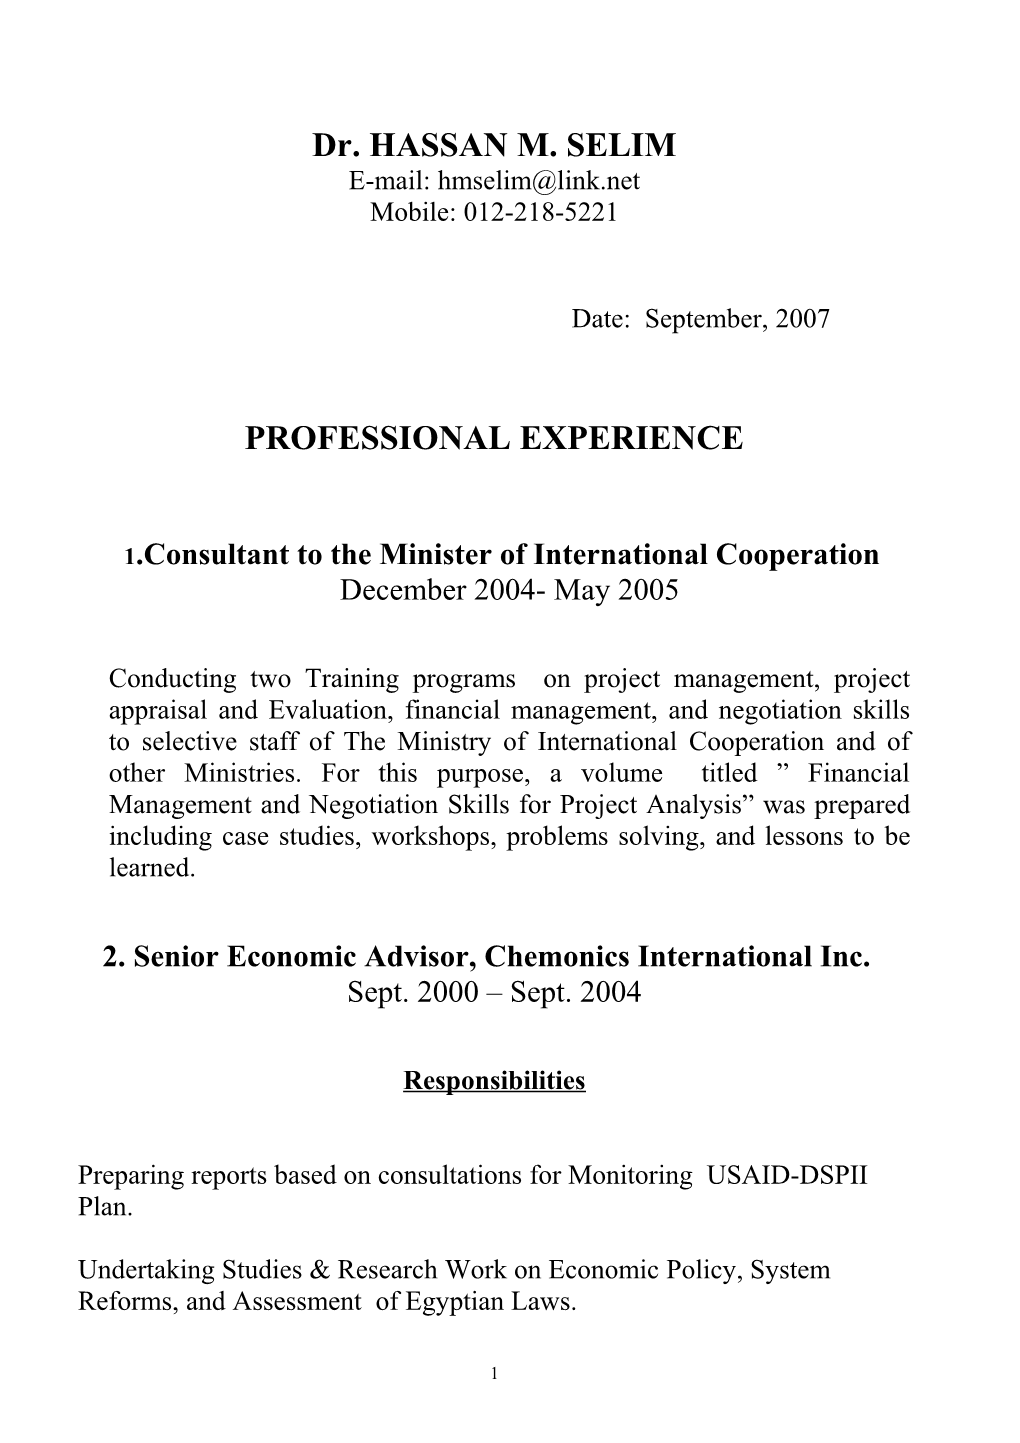 1.Consultant to the Minister of International Cooperation